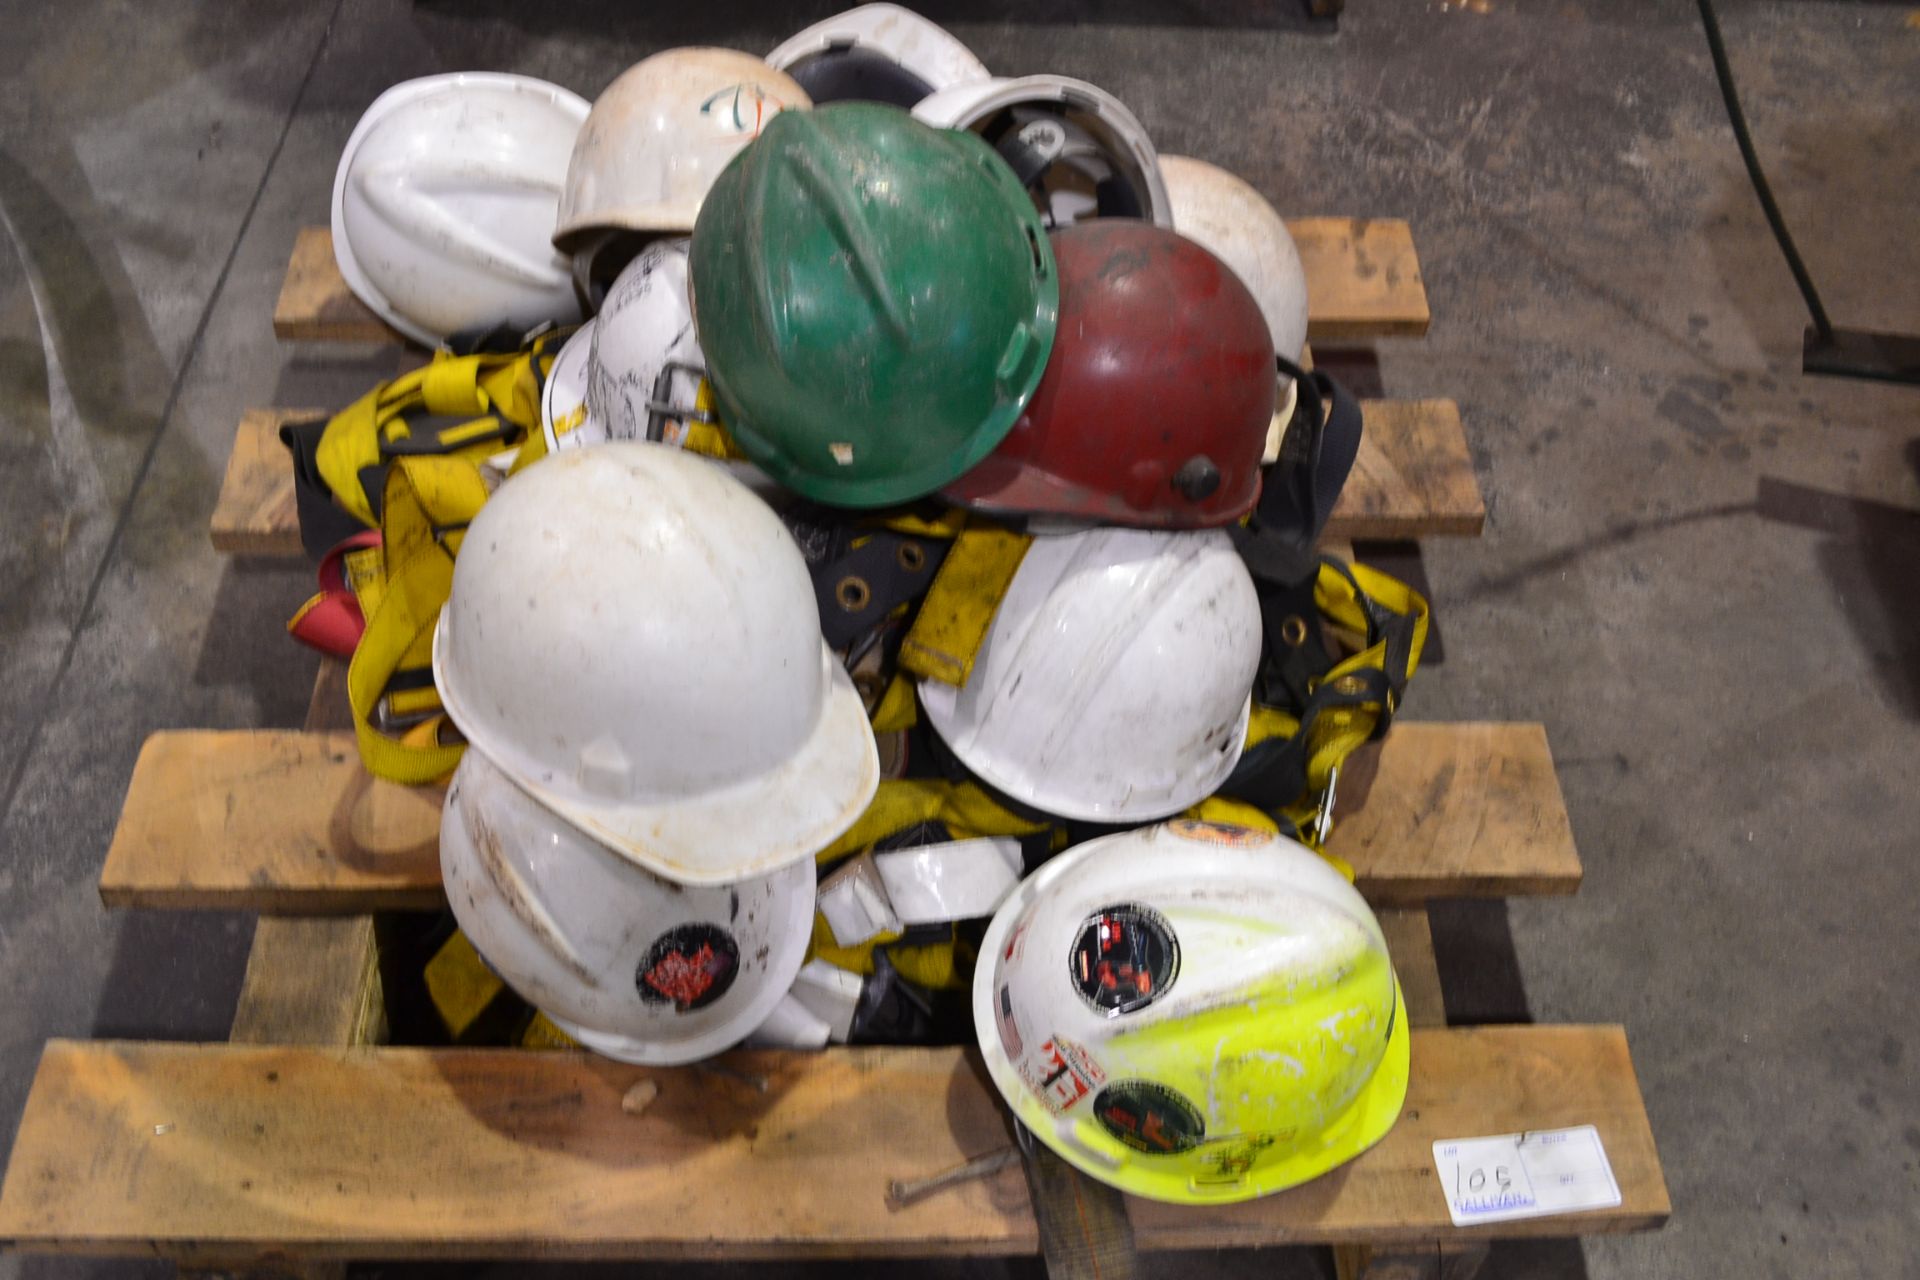 SKID OF HARD HATS AND SAFETY HARNESSES